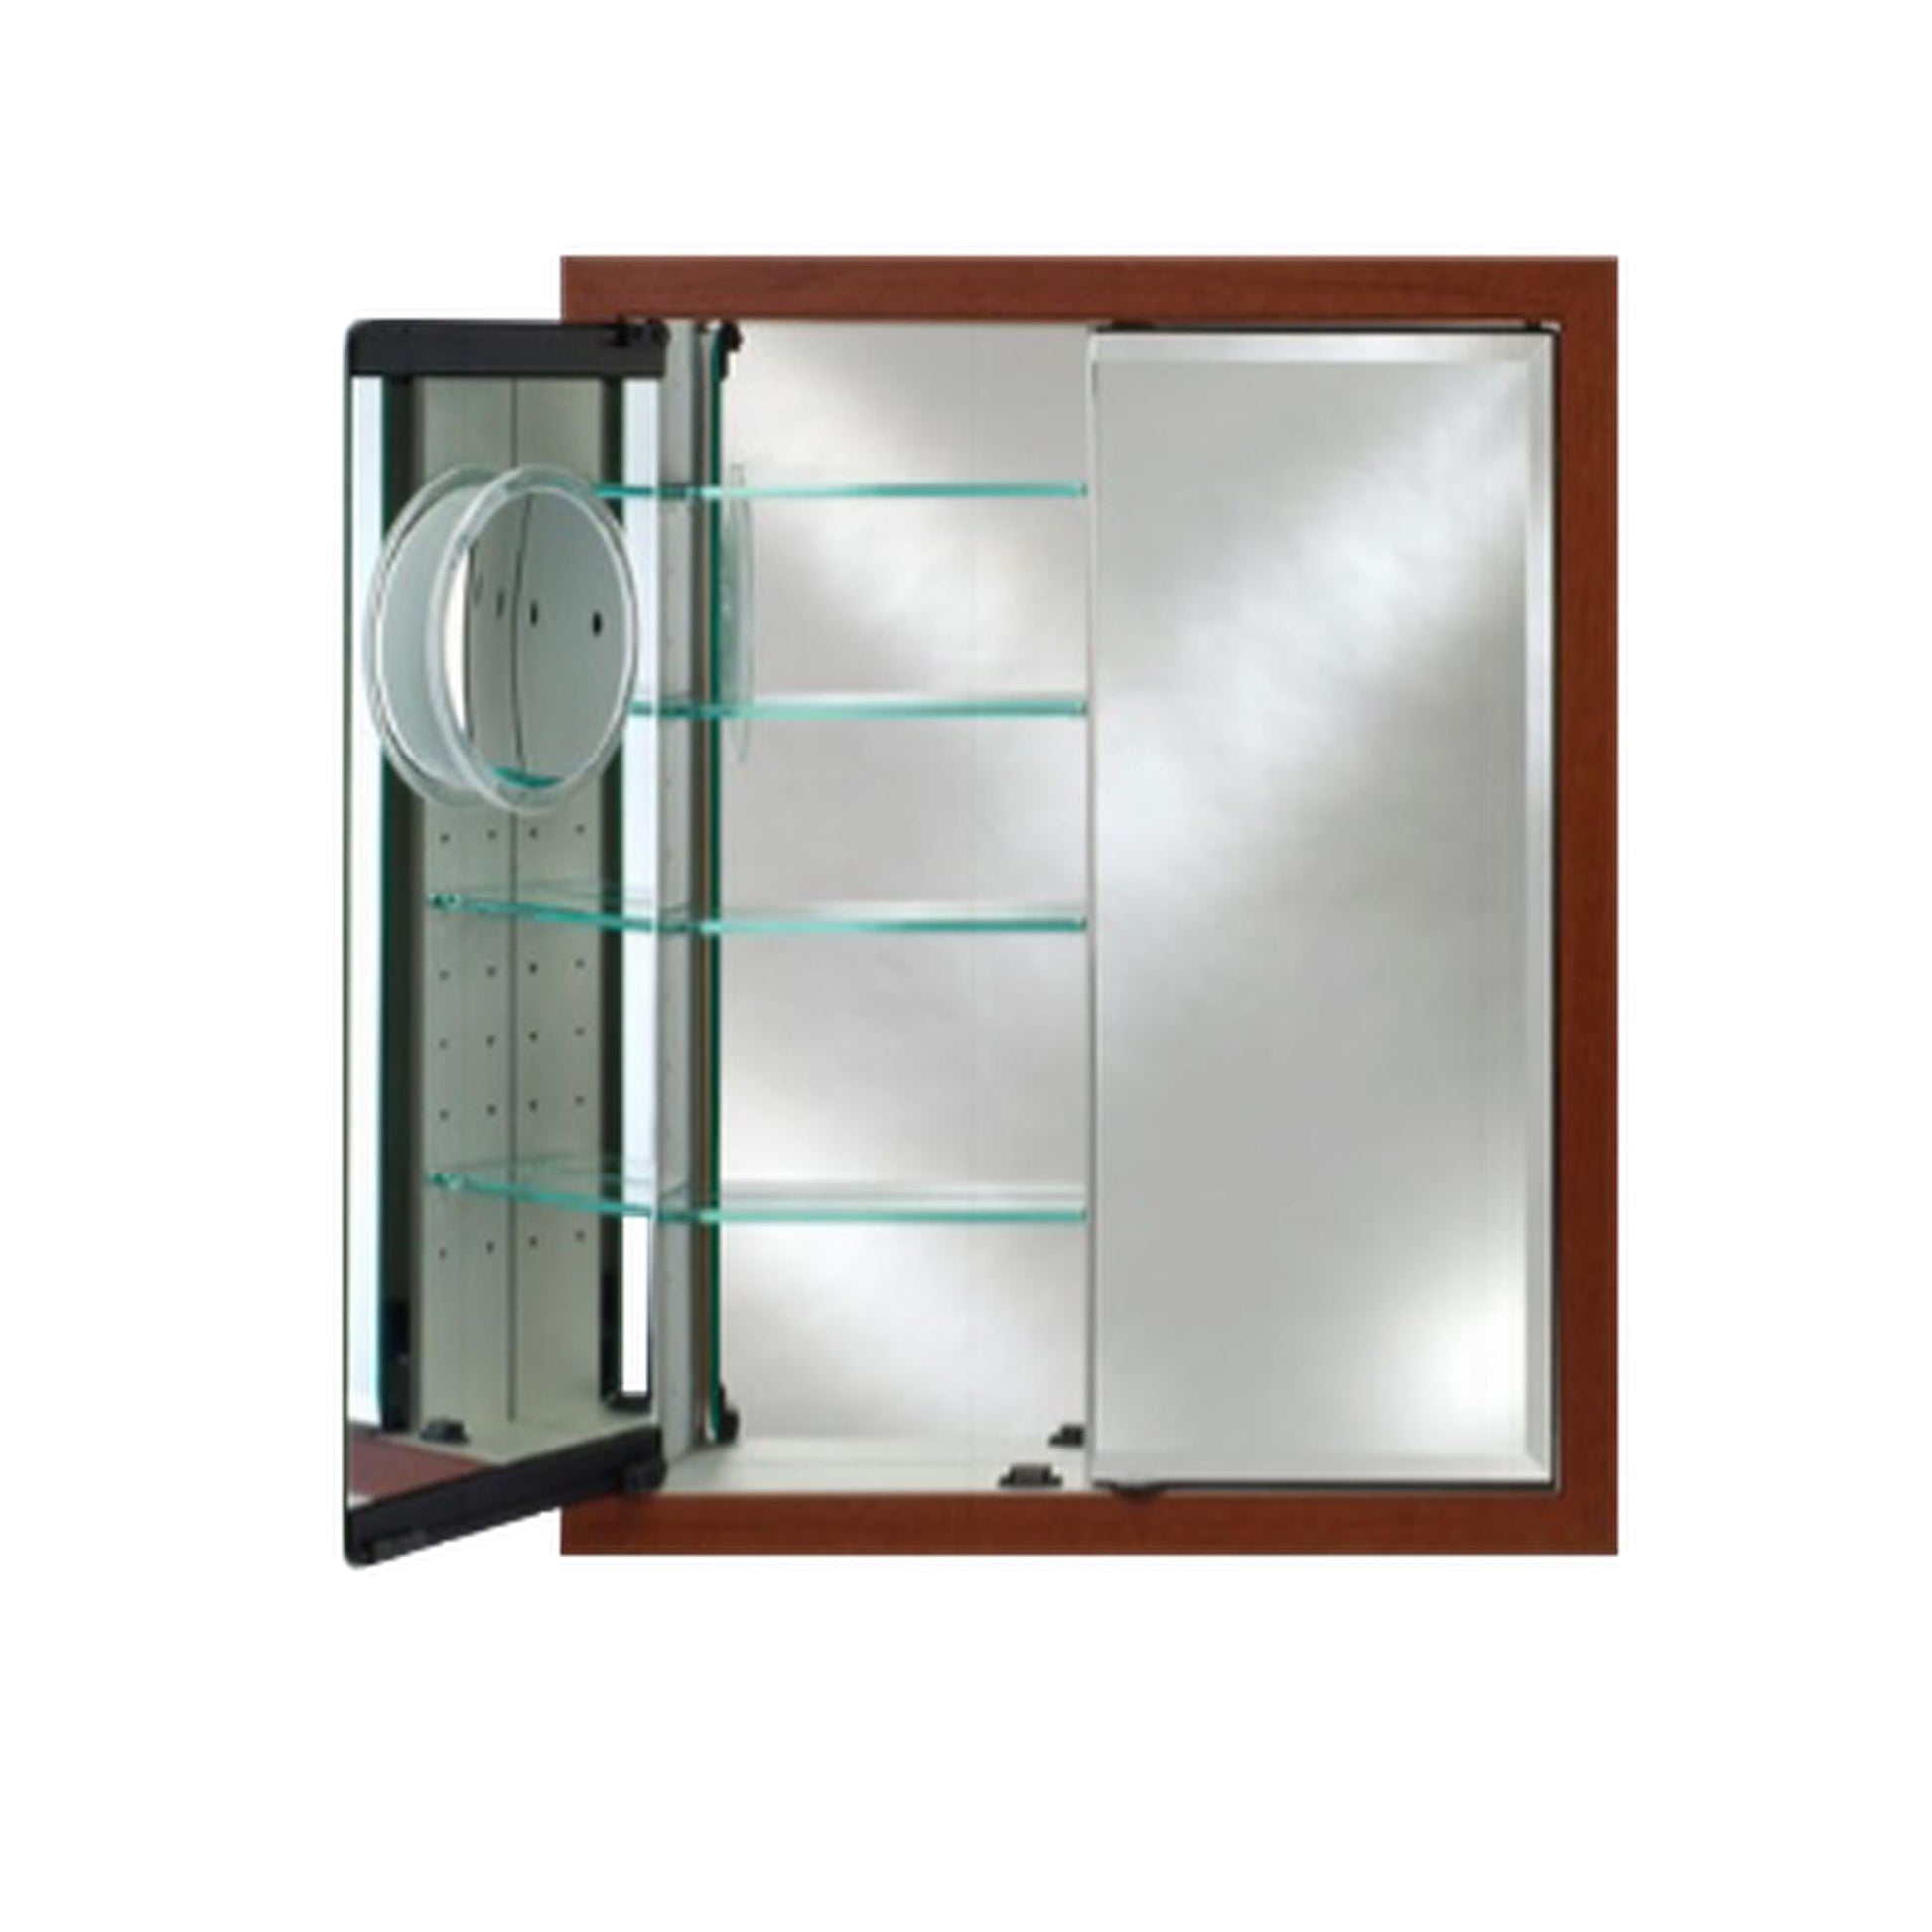 Afina Signature 33" x 23" Polished Glimmer-Flat Recessed Retro-Fit Double Door Medicine Cabinet With Beveled Edge Mirror